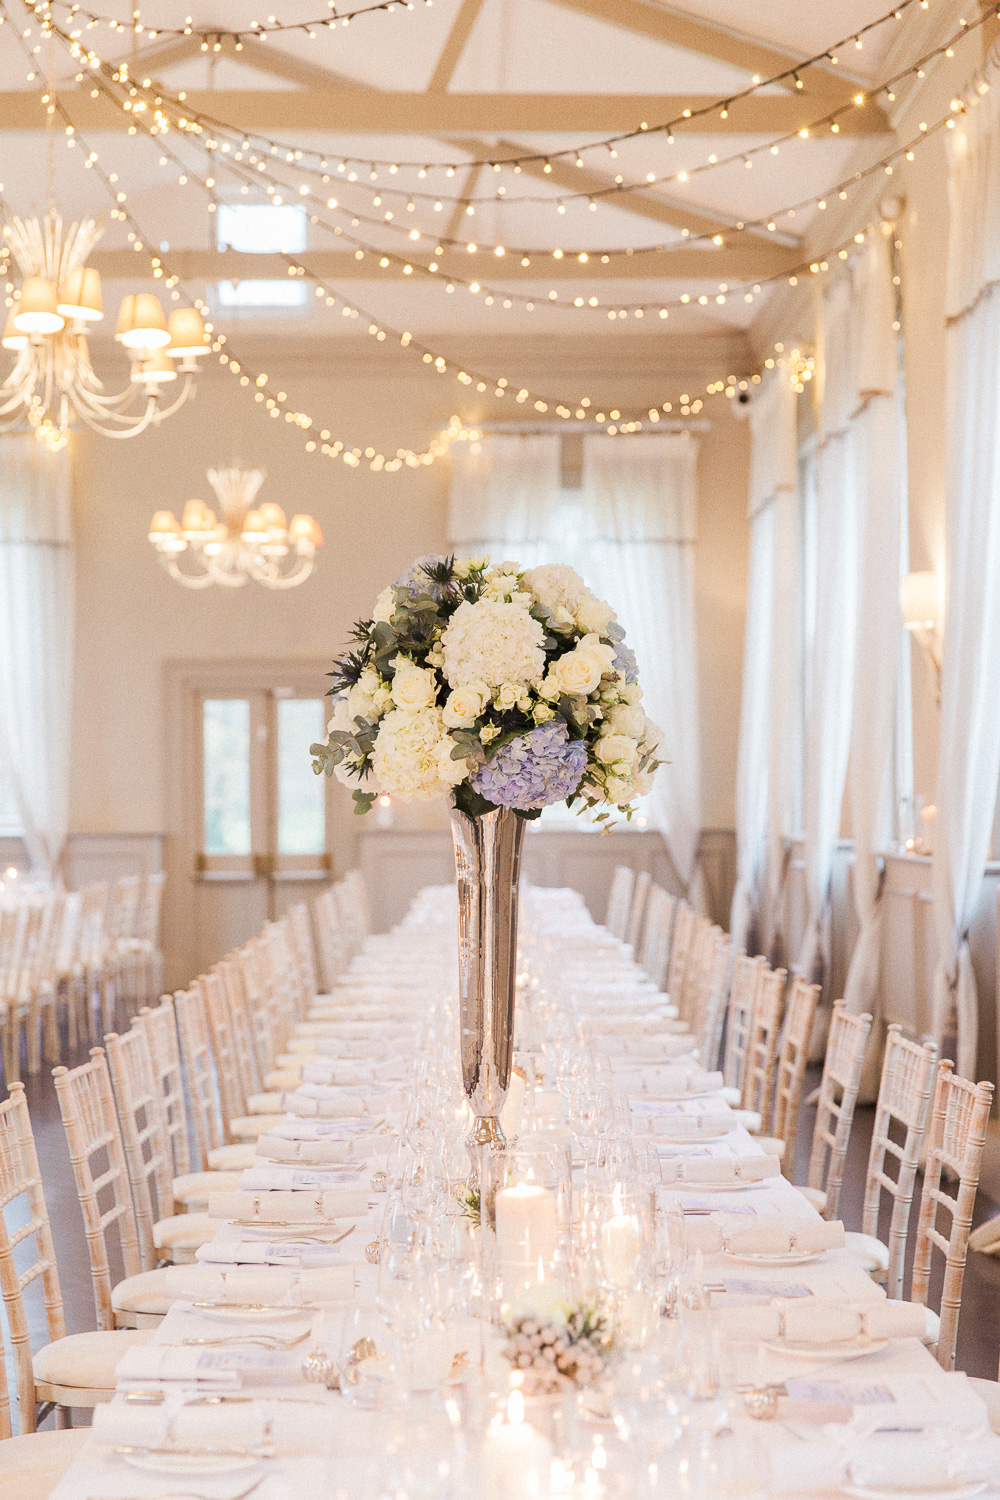 Reception table with blue and white centerpiece and fairy lights at Morden Hall wedding venue in London